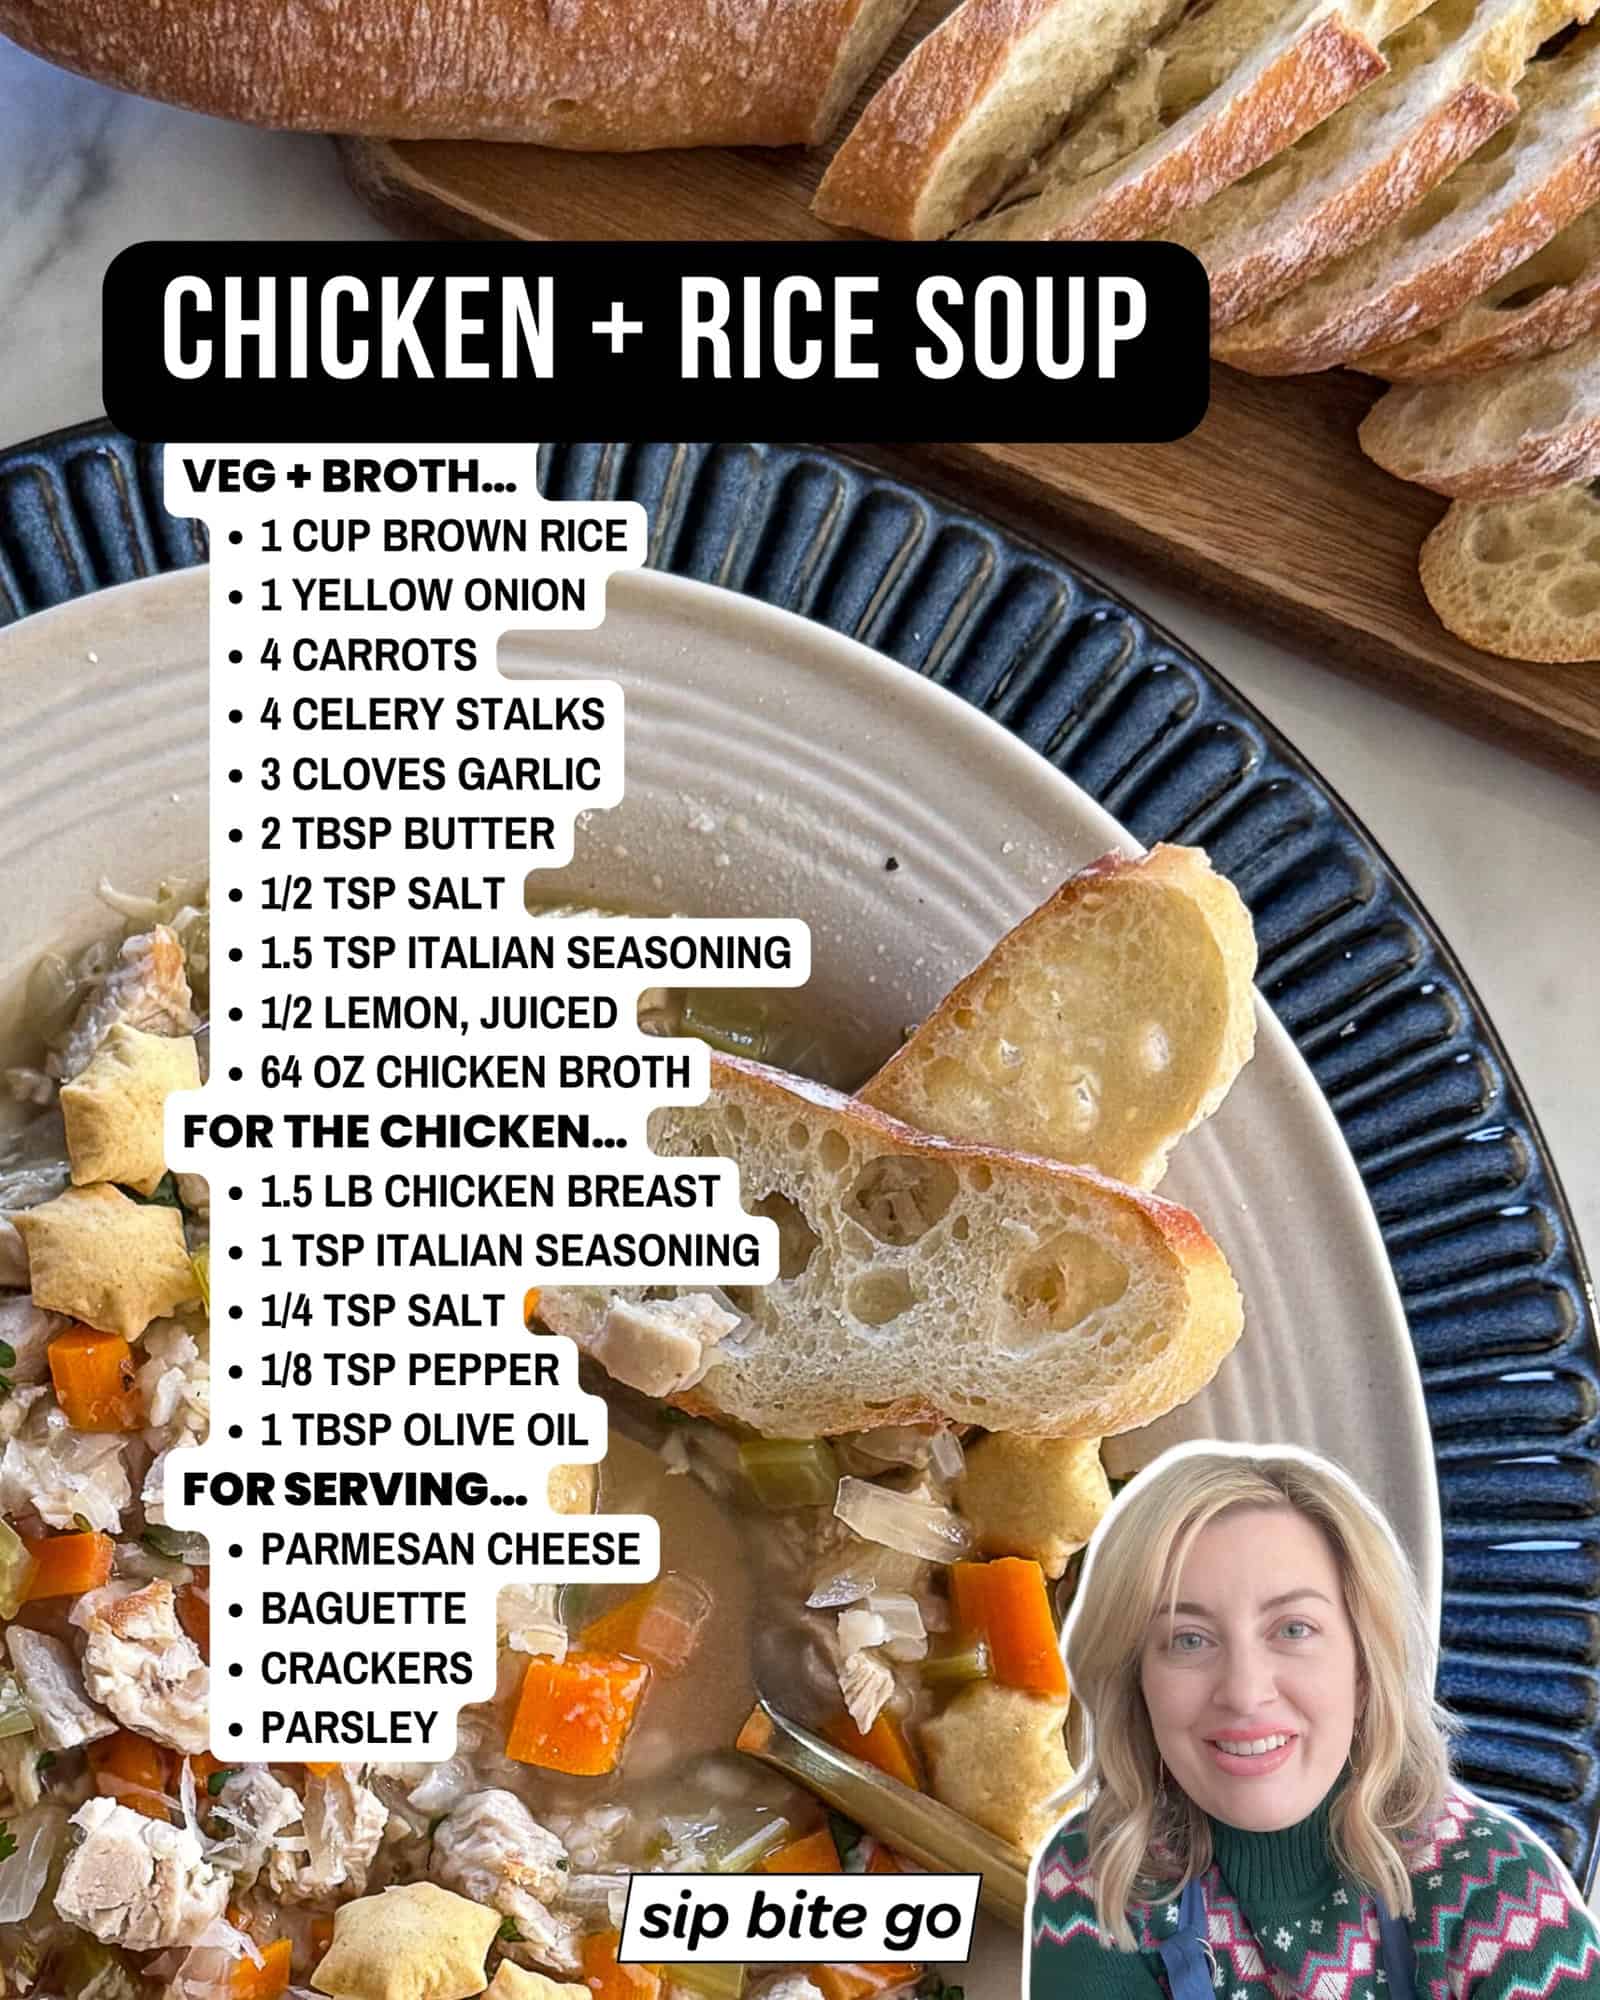 List of ingredients to make chicken and rice soup